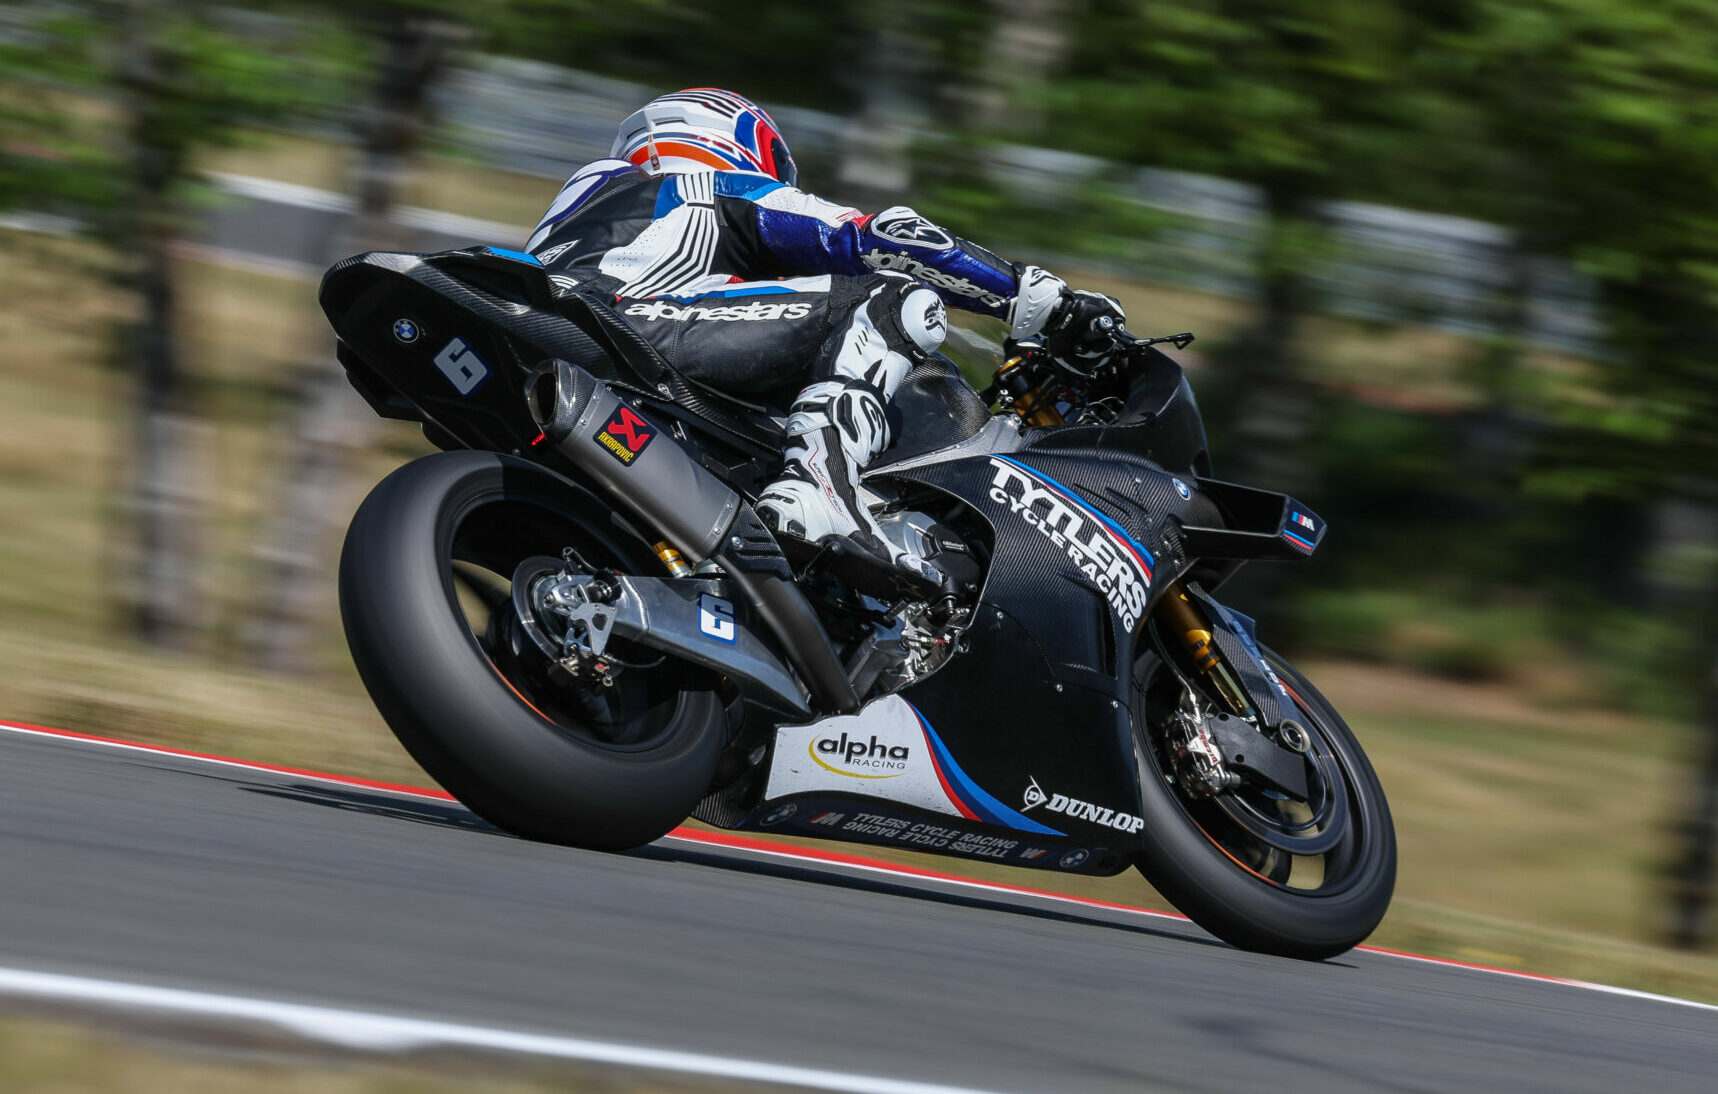 Cameron Beaubier (6) at speed on his new BMW M 1000 RR Superbike at Ridge Motorsports Park. Photo by Brian J. Nelson.